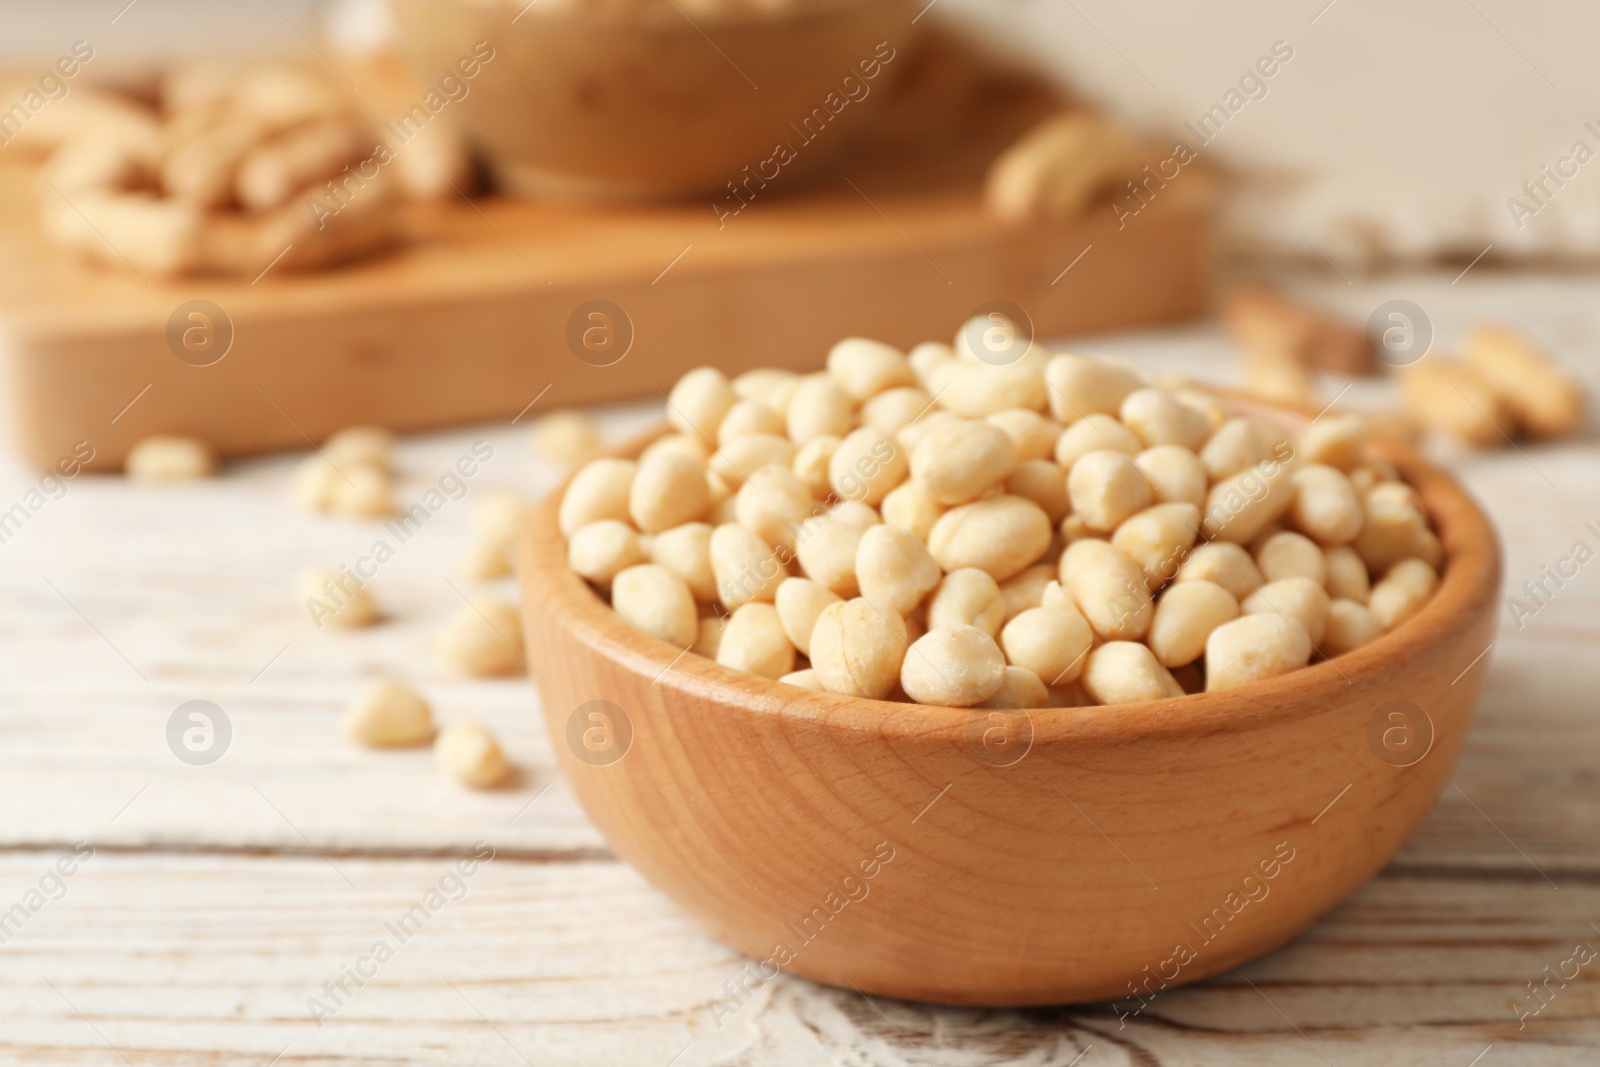 Photo of Shelled peanuts in wooden bowl on table